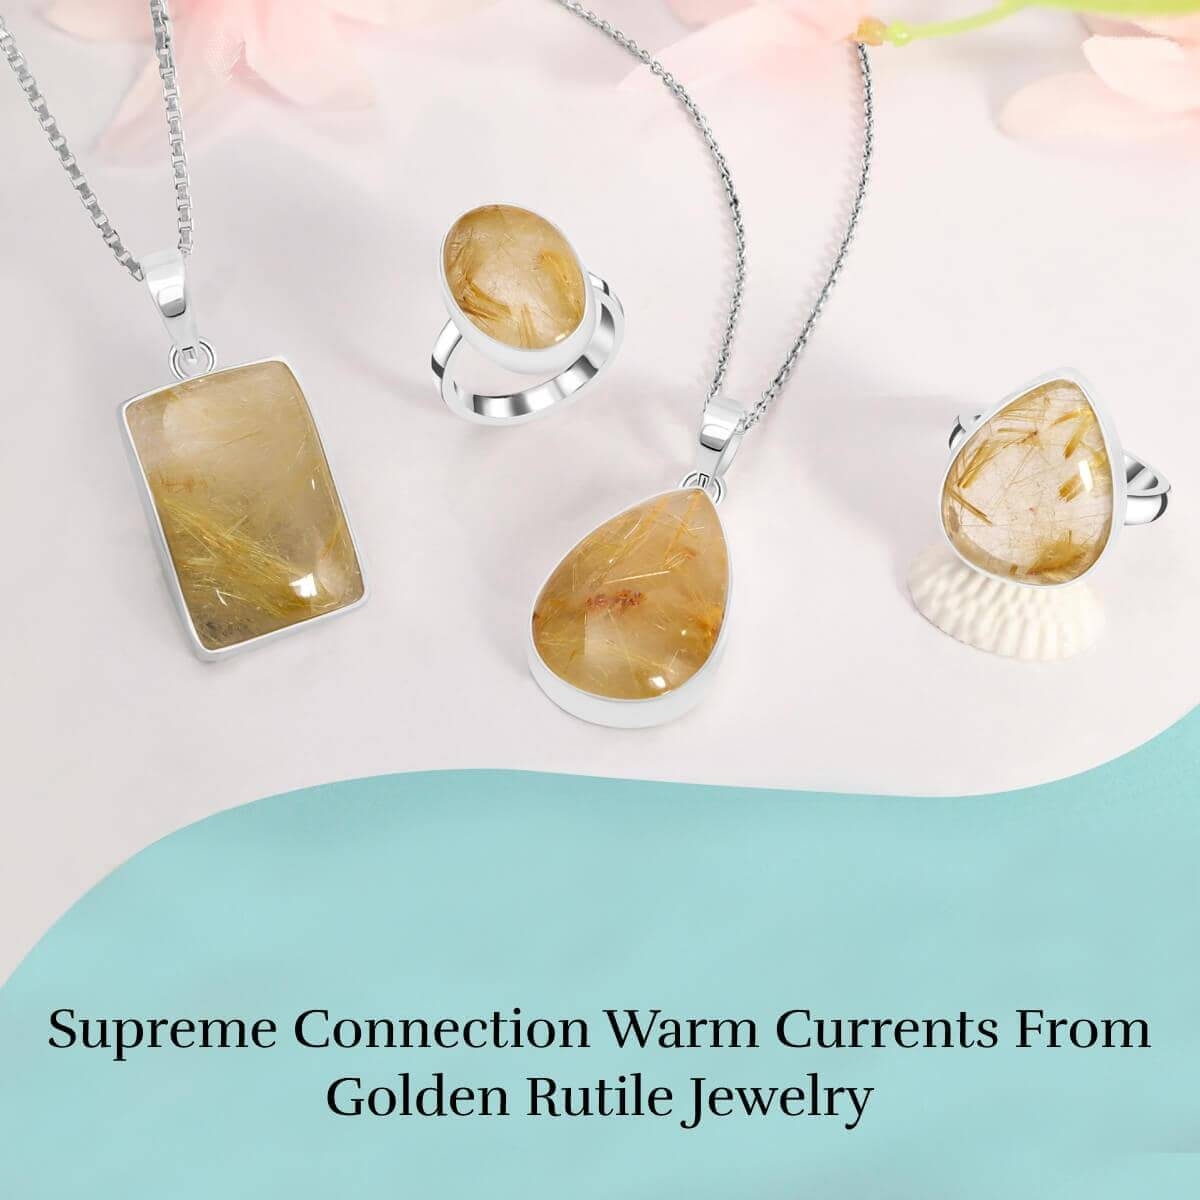 Spiritual Therapy from Golden Rutile's Jewelry